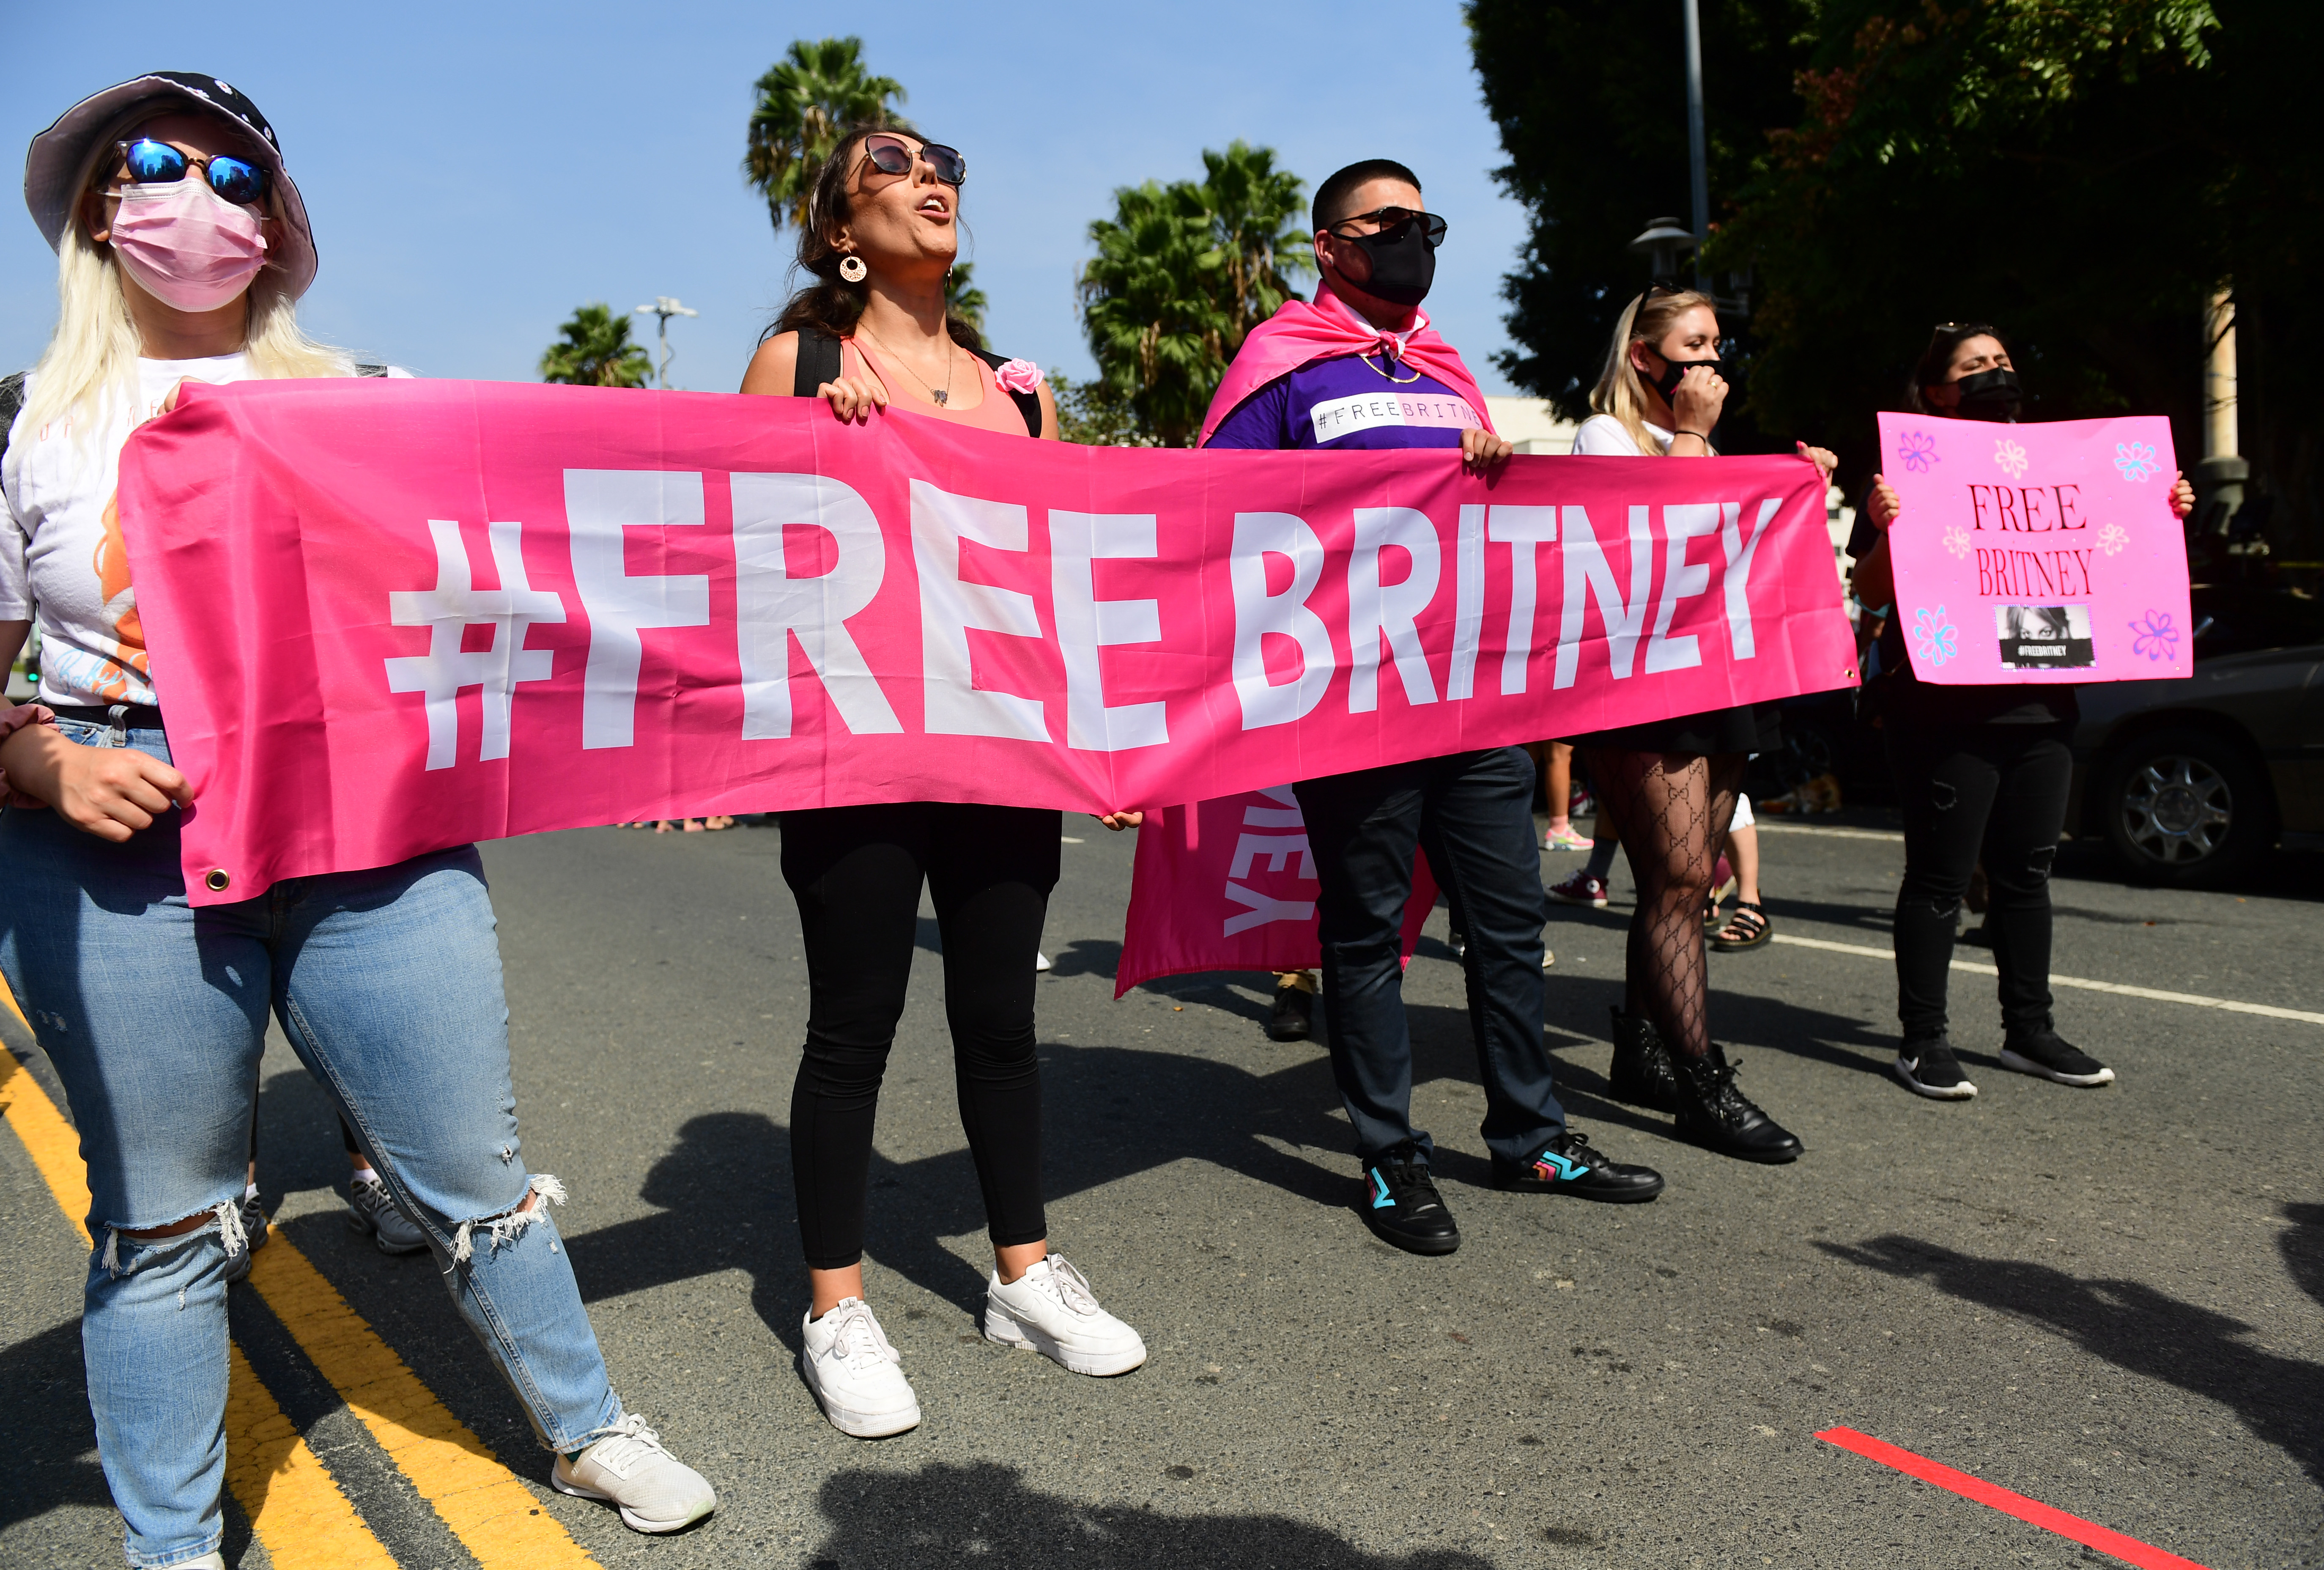 #FreeBritney Rally In Los Angeles